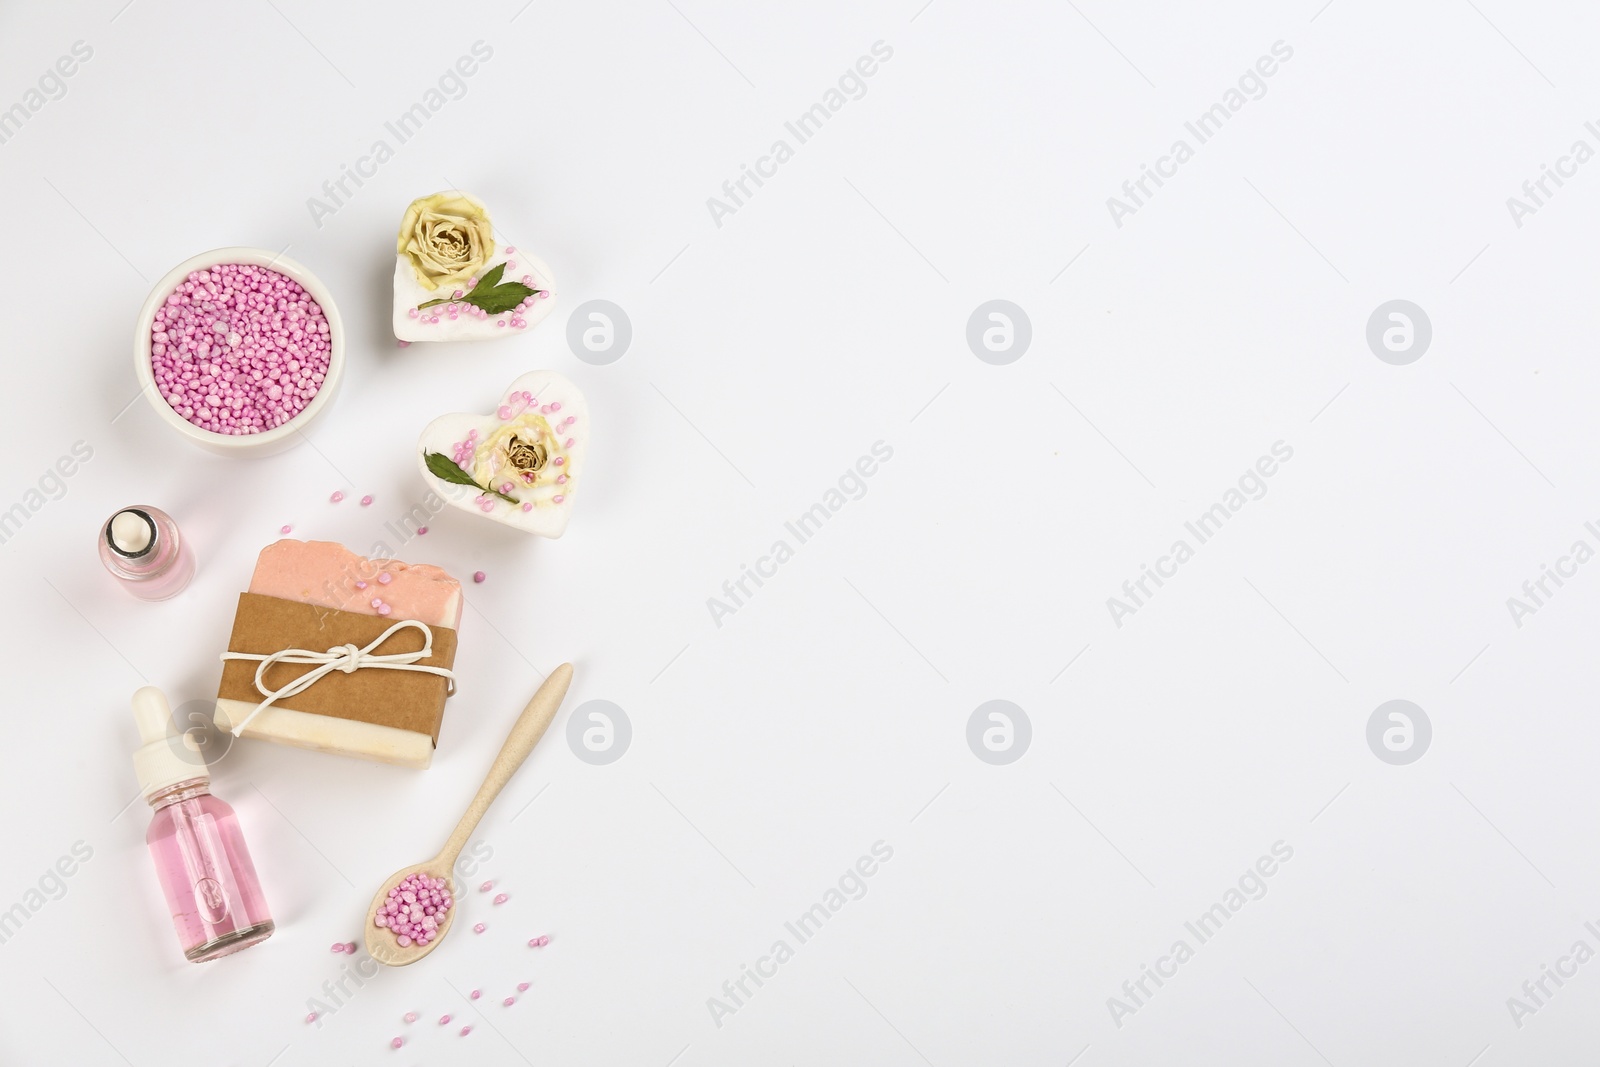 Photo of Natural handmade soap and ingredients on white background, top view